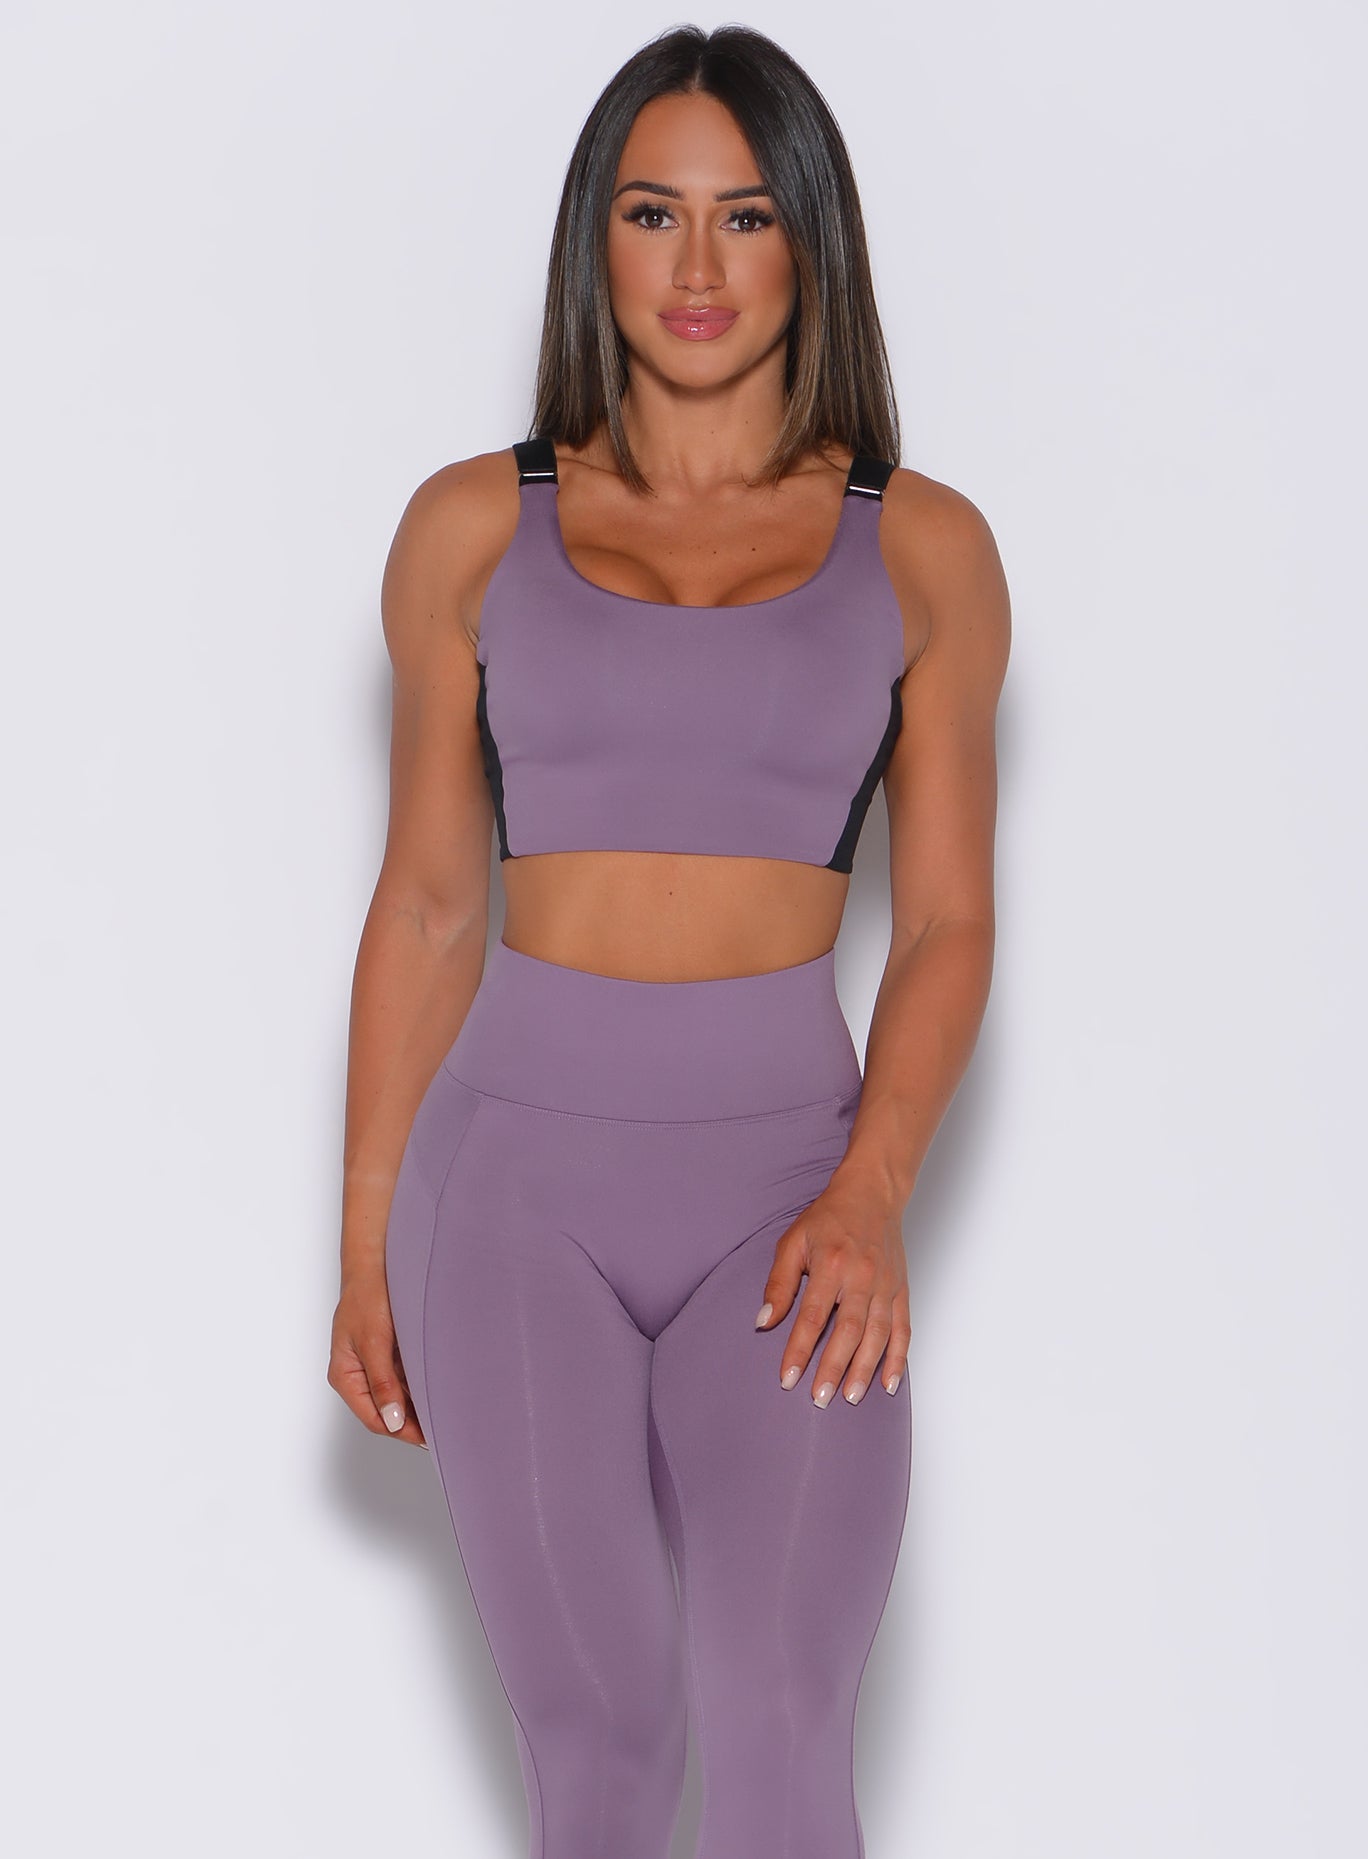 Front profile view of a model  wearing our banded sports bra in violet frost color and a matching leggings